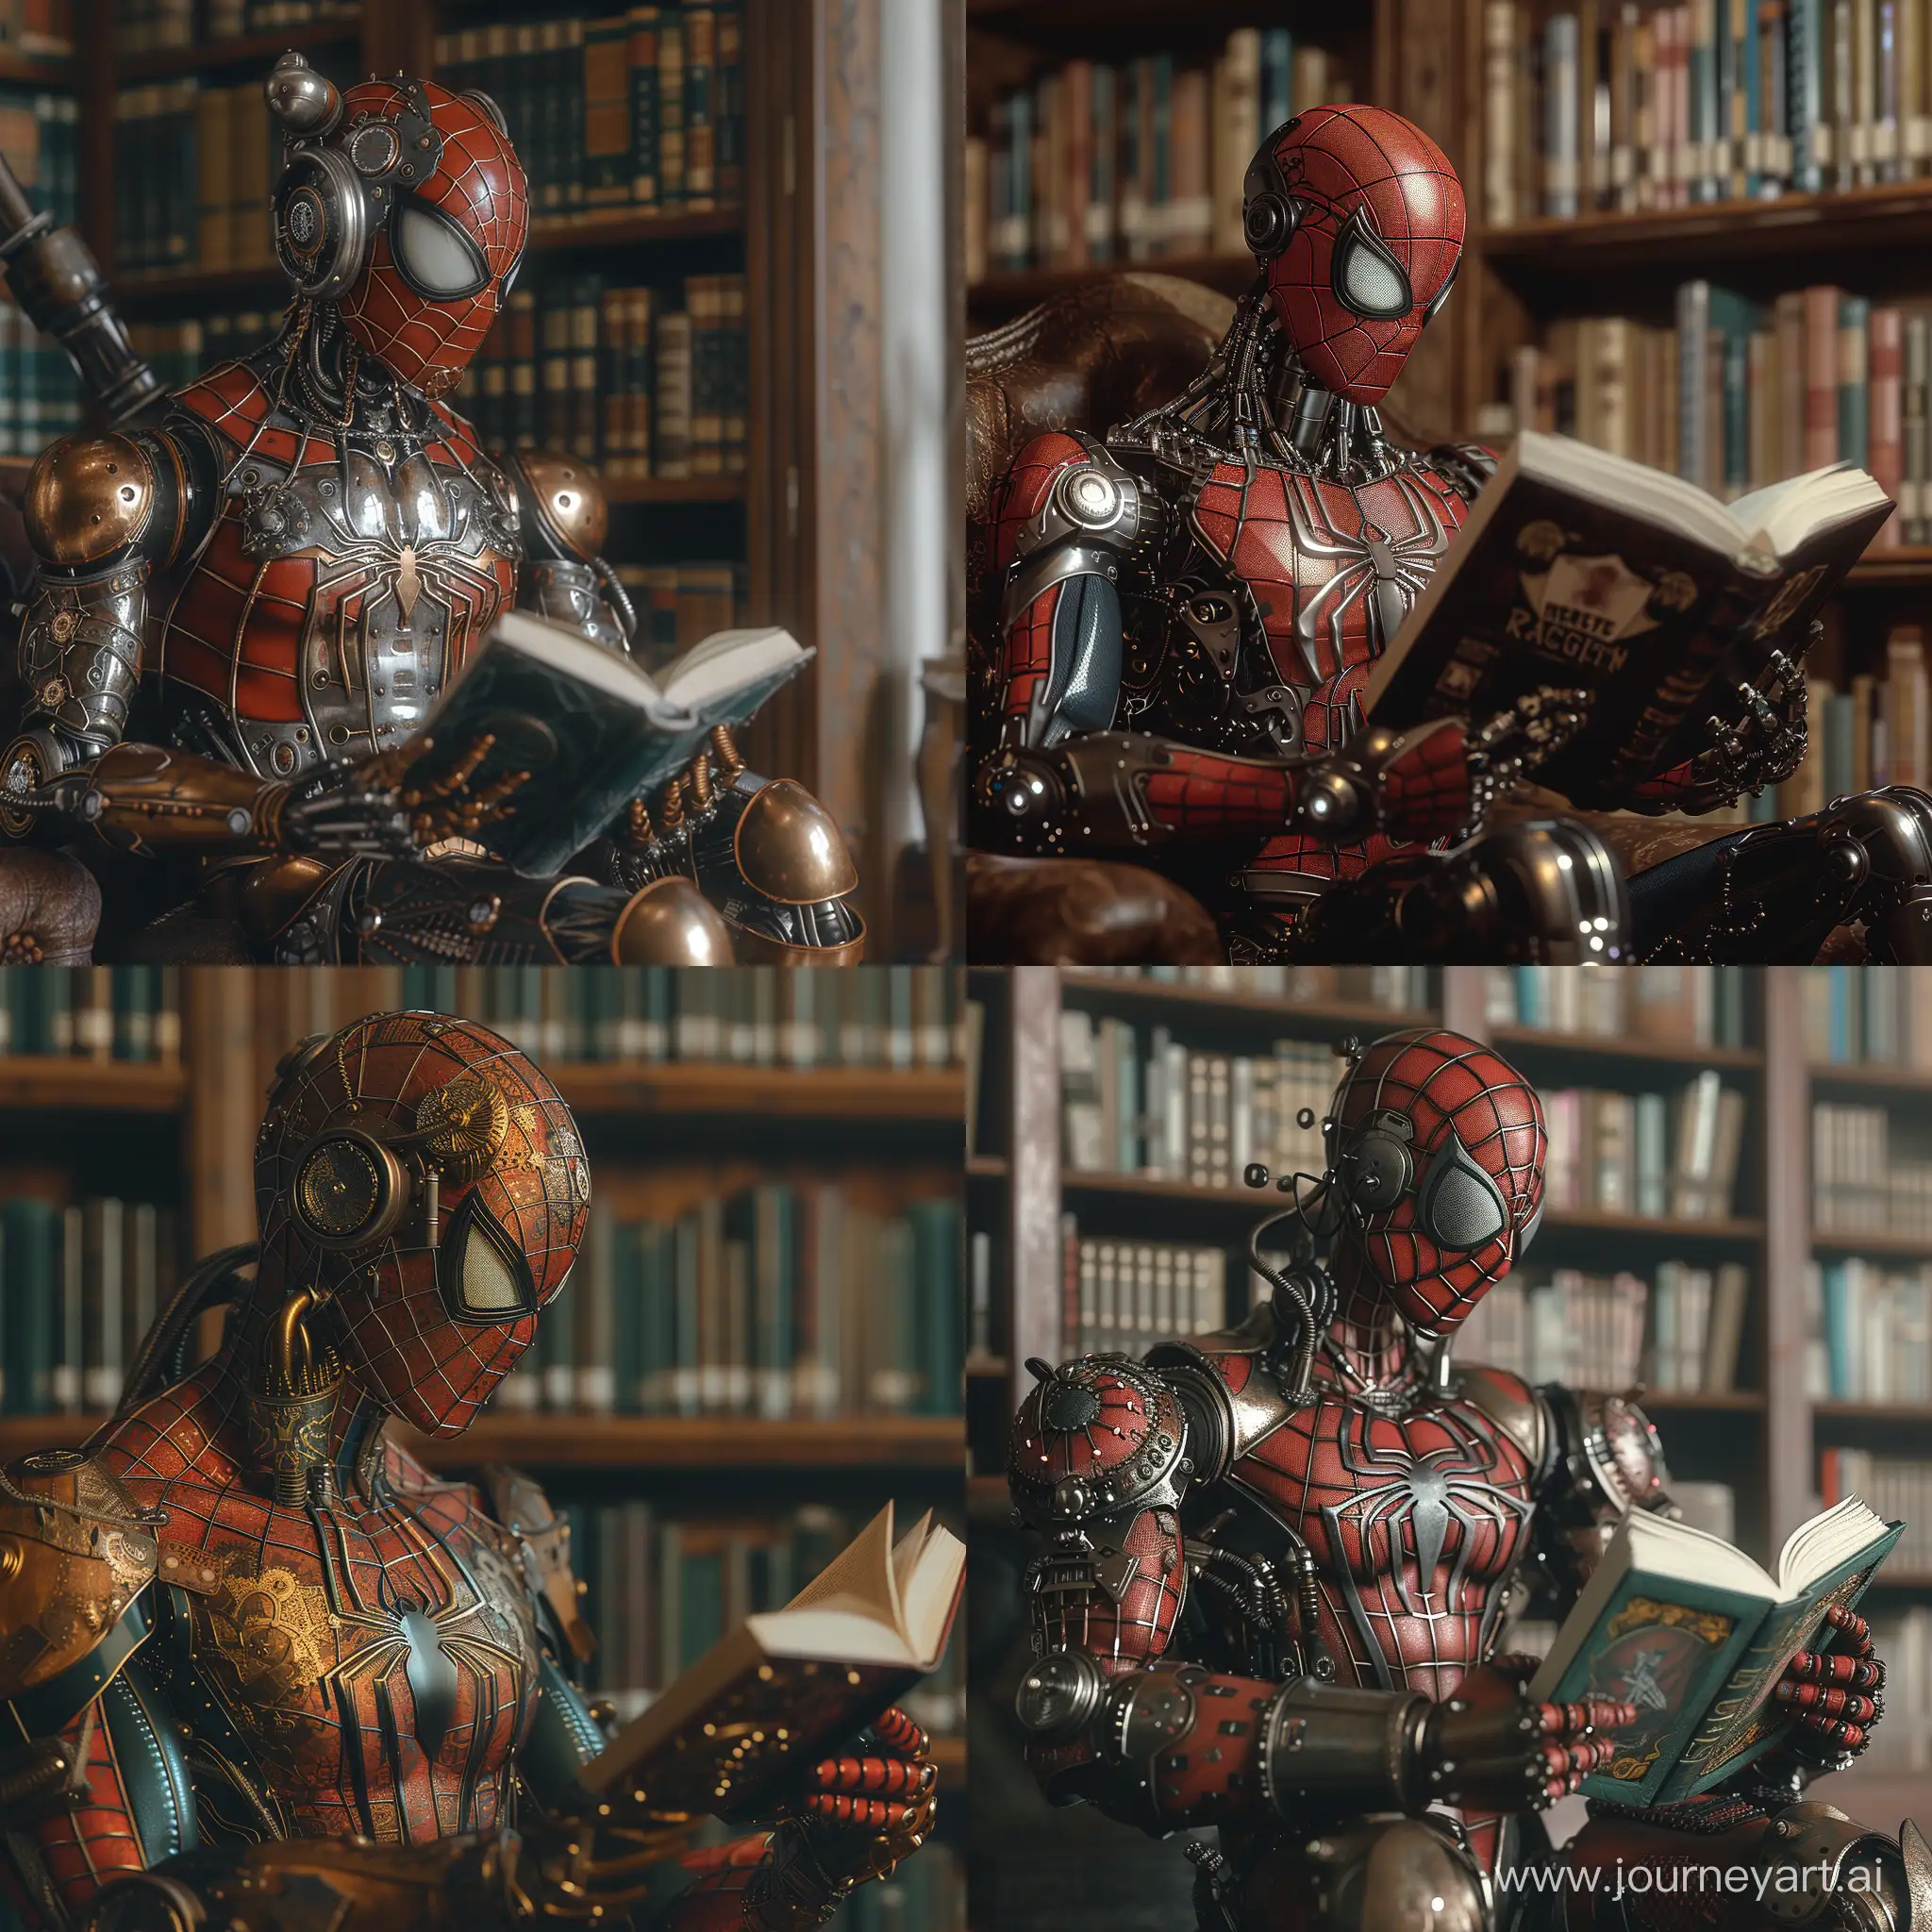 Steampunk-Spiderman-Robot-Engrossed-in-Book-at-Library